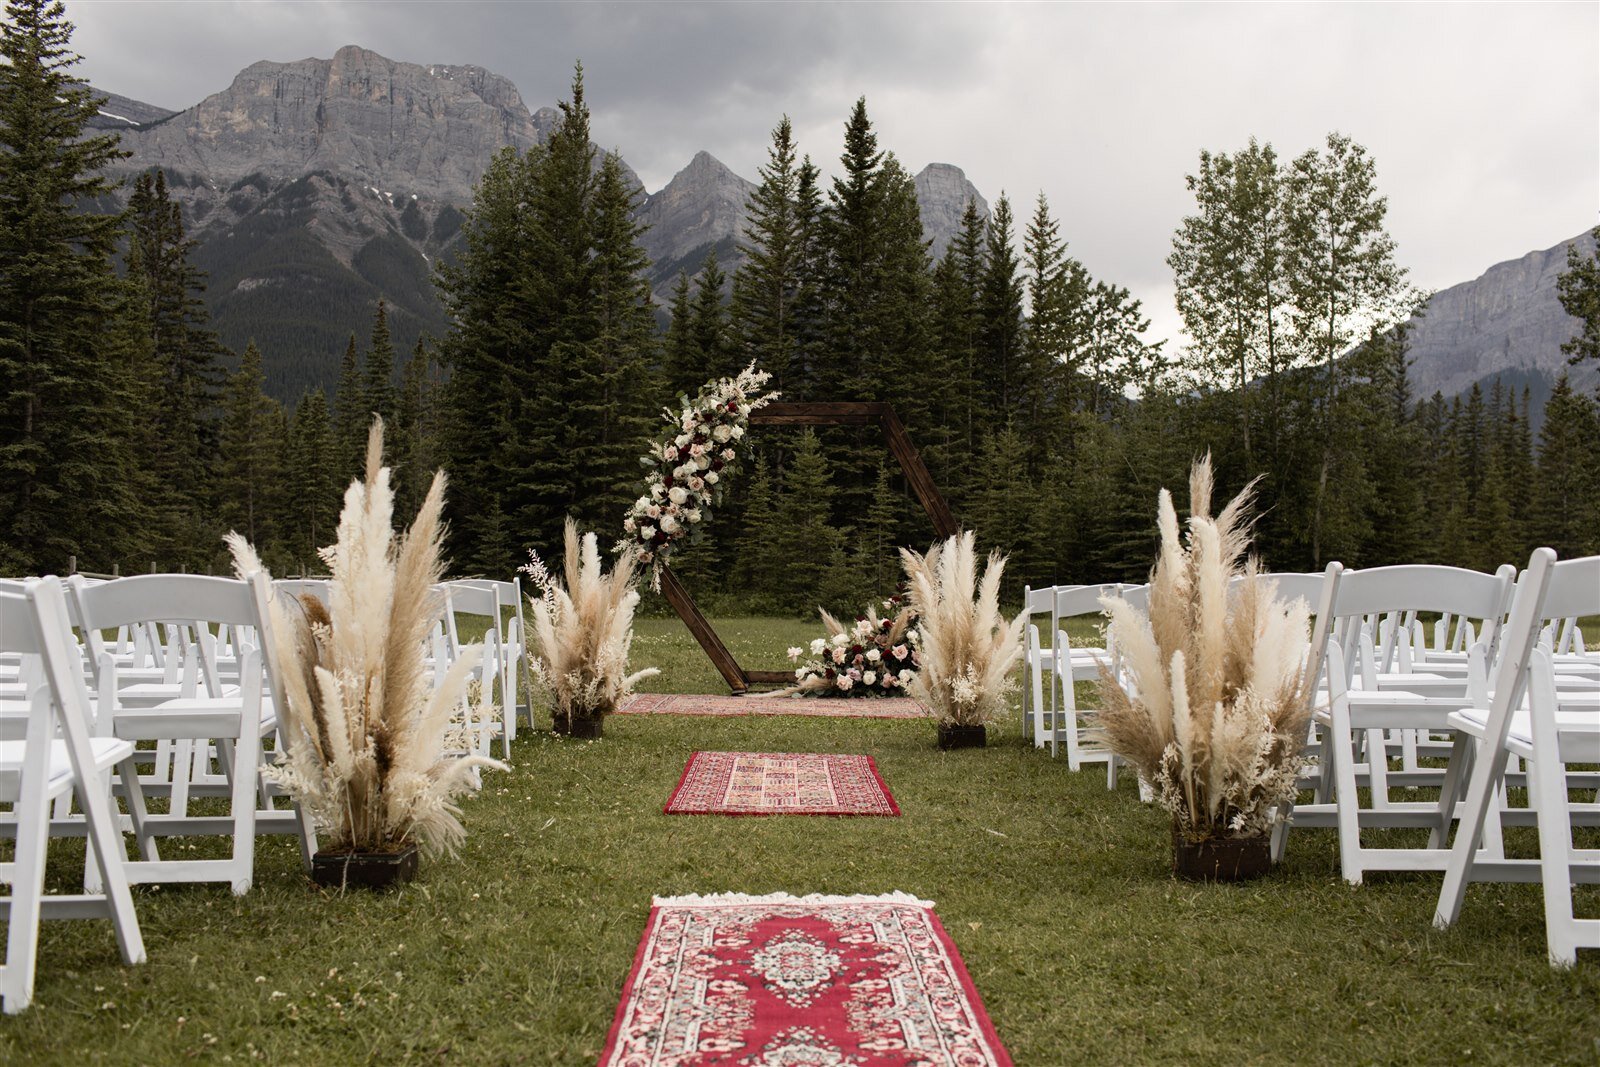 Over 30 Beautifully Styled Ceremony Scenes Across Southern Alberta to Inspire Your Nuptials Featured by Brontë Bride